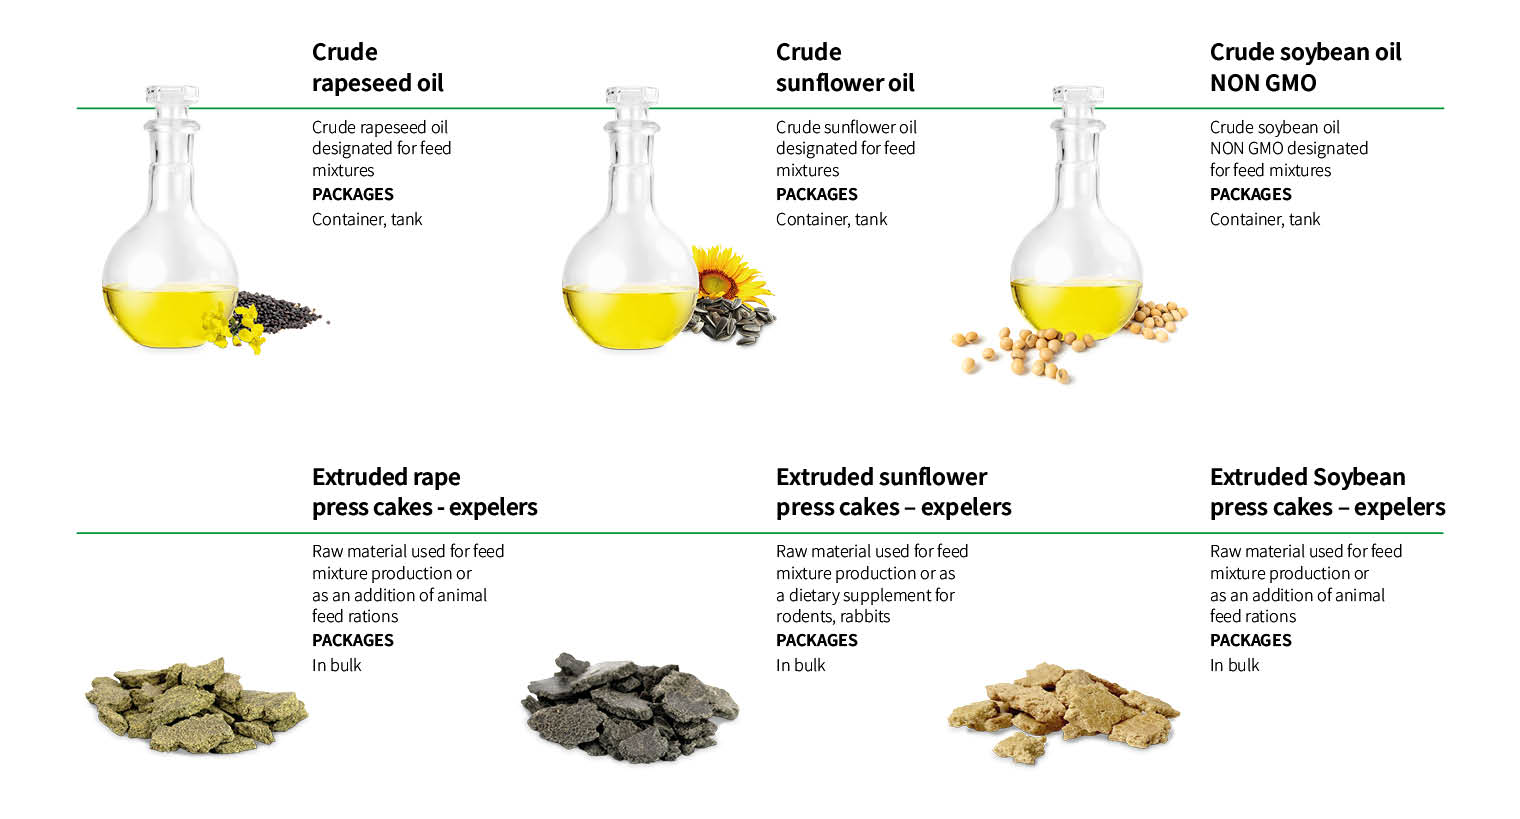 Raw materials for feed compounds